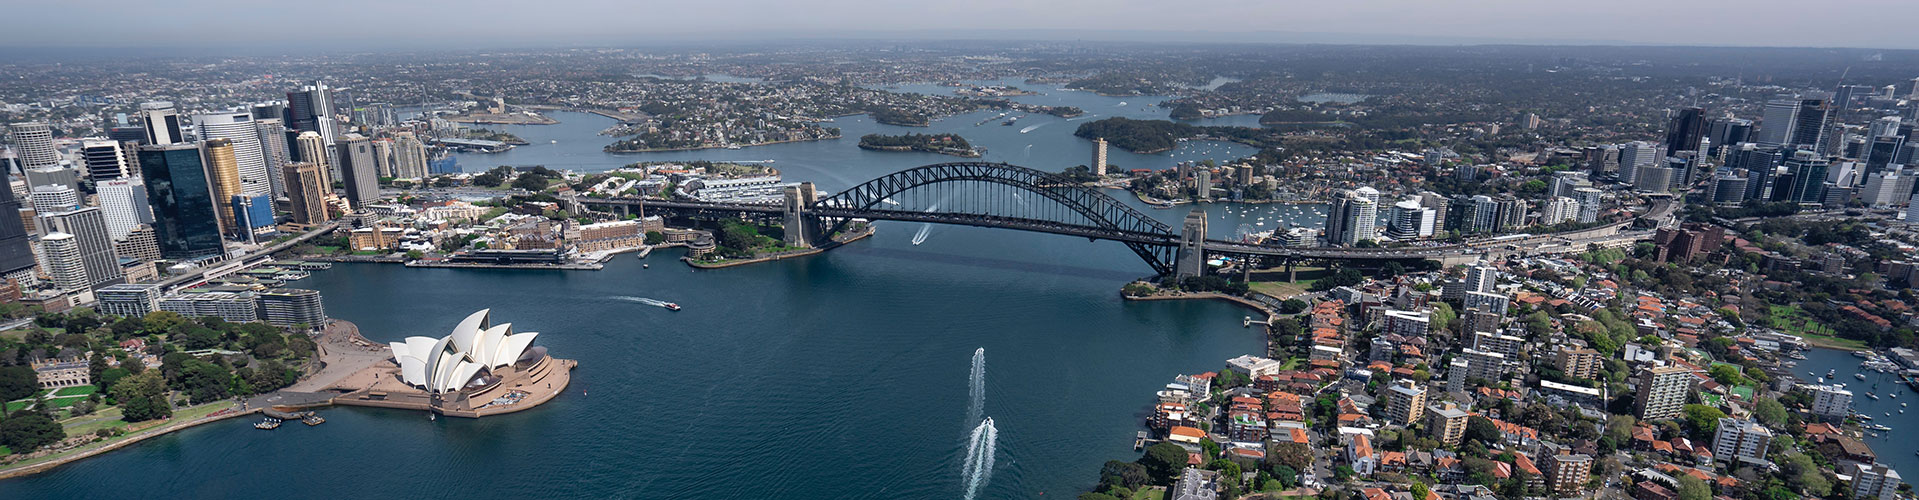 An aerial view of Sydney Harbor in Australia showing the city, Sydney Opera House and Sydney Harbor Bridge.